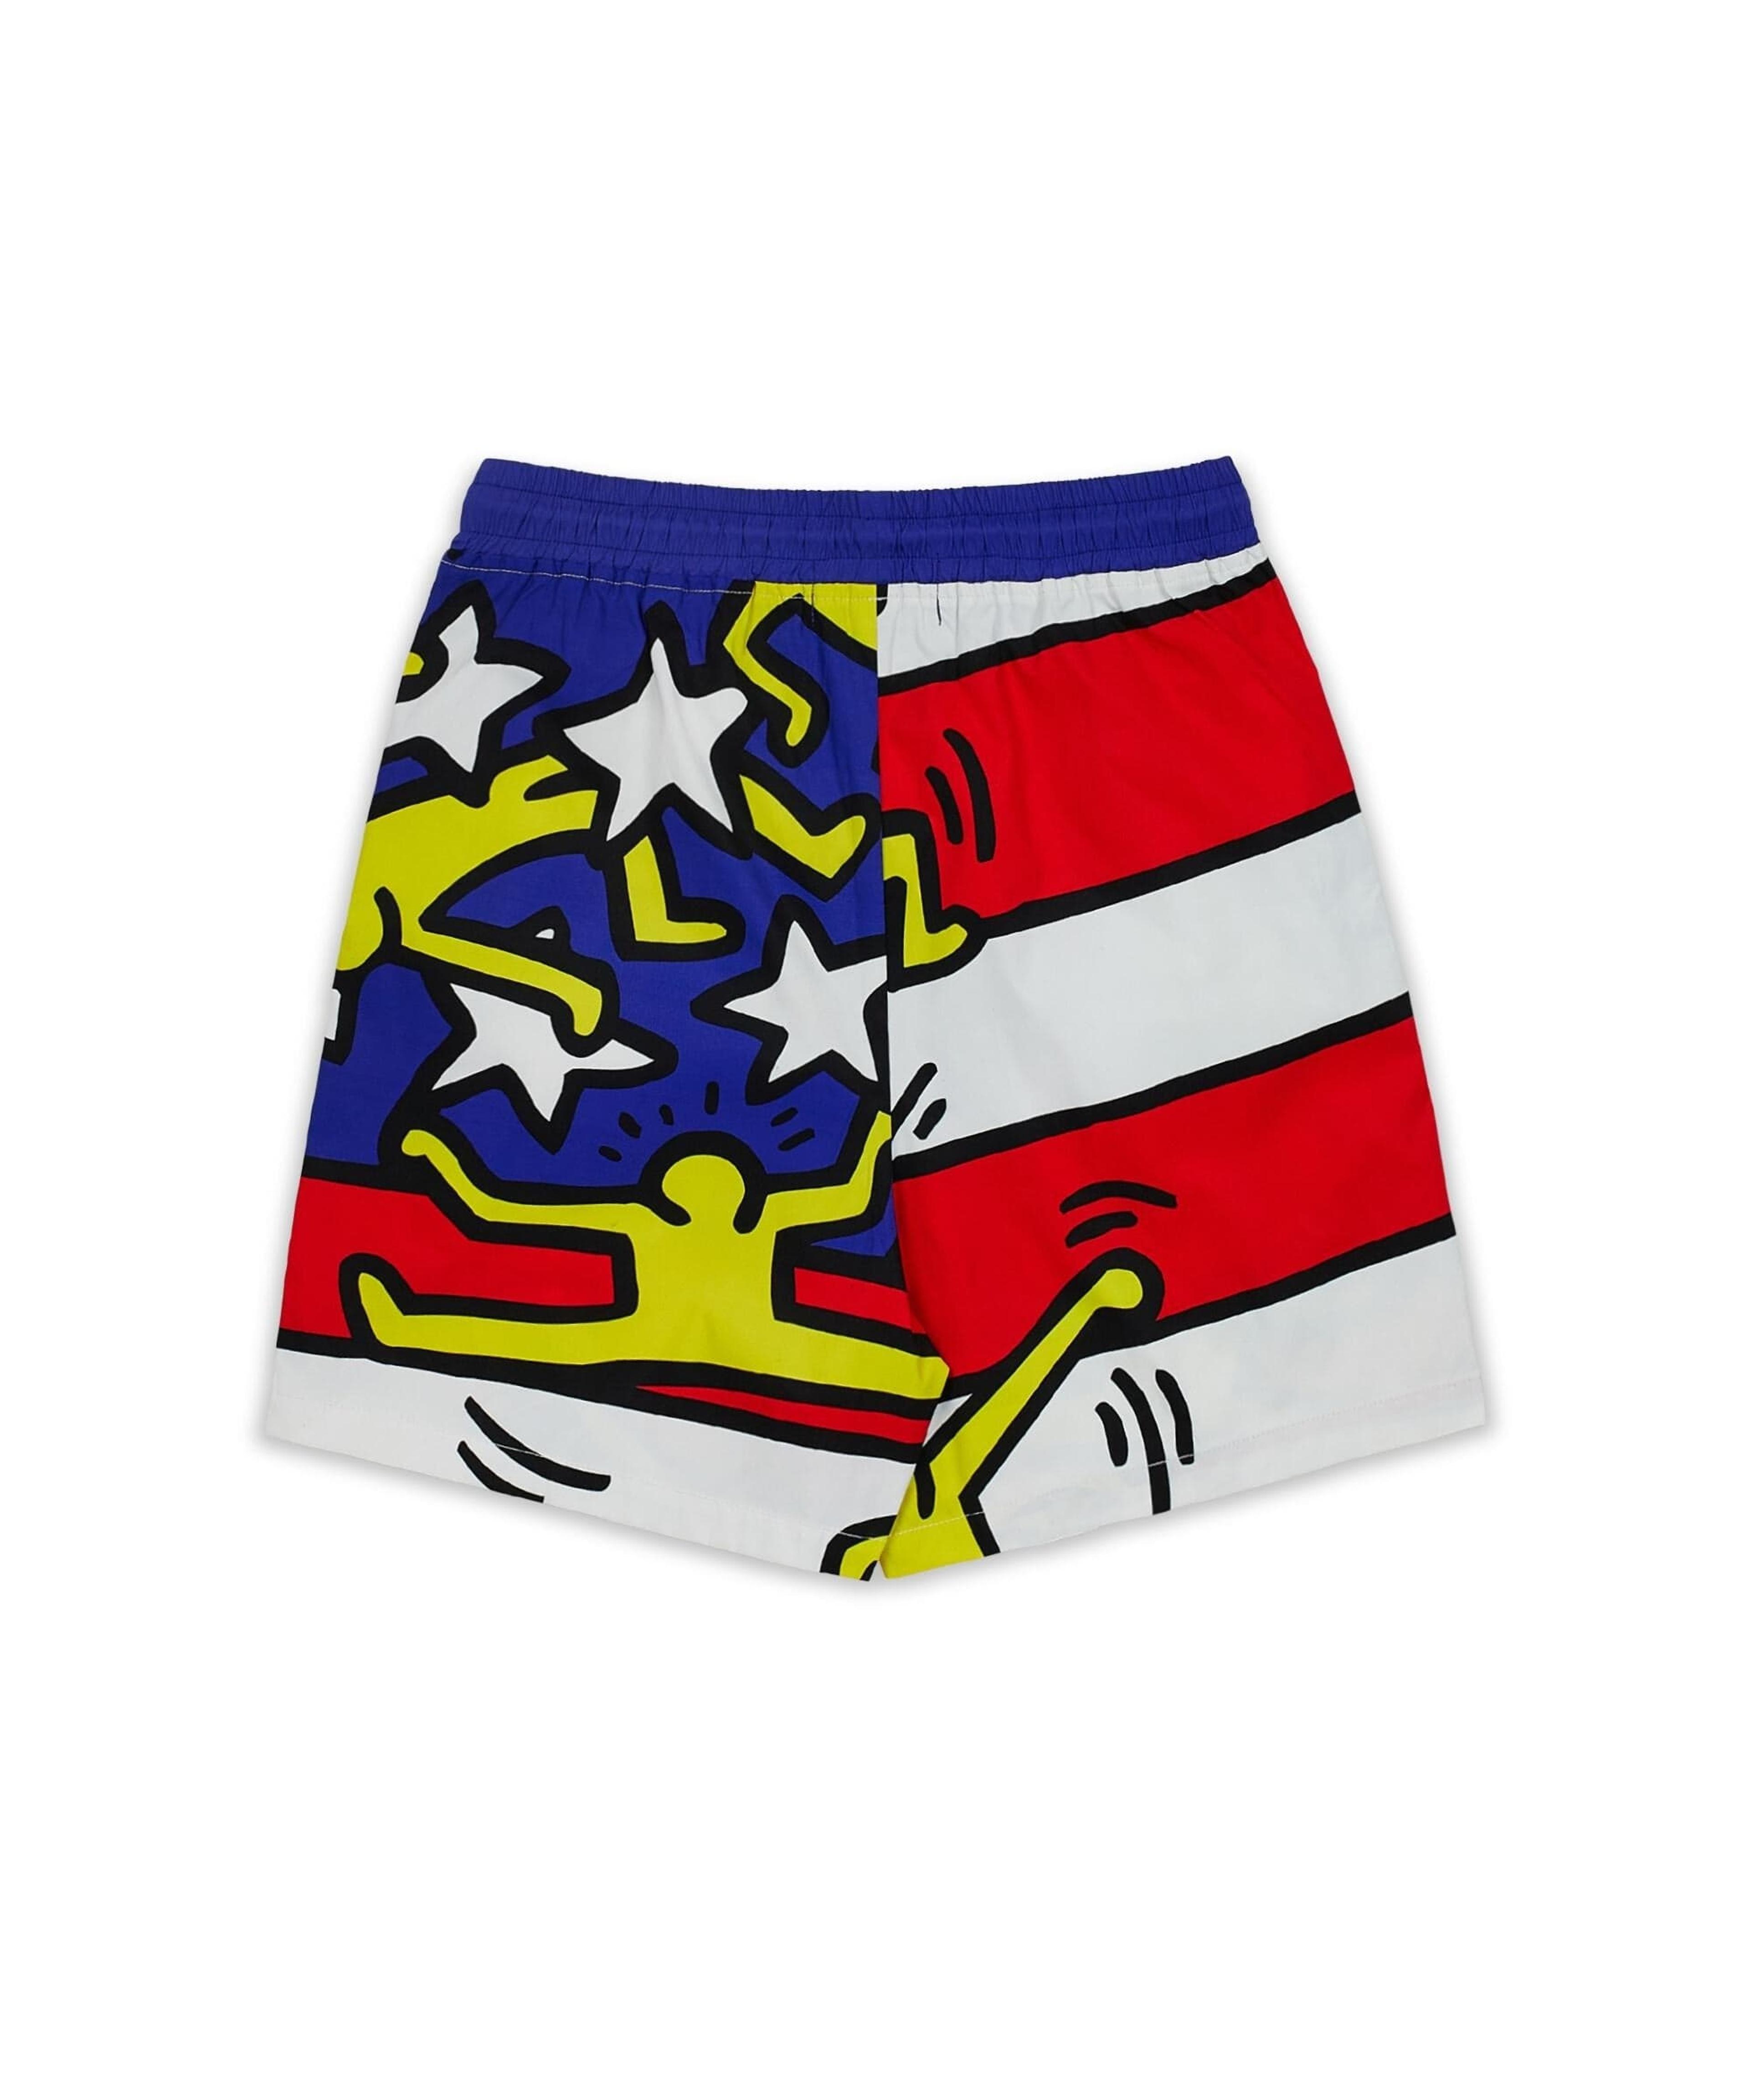 Alternate View 6 of Keith Haring American Flag Shorts